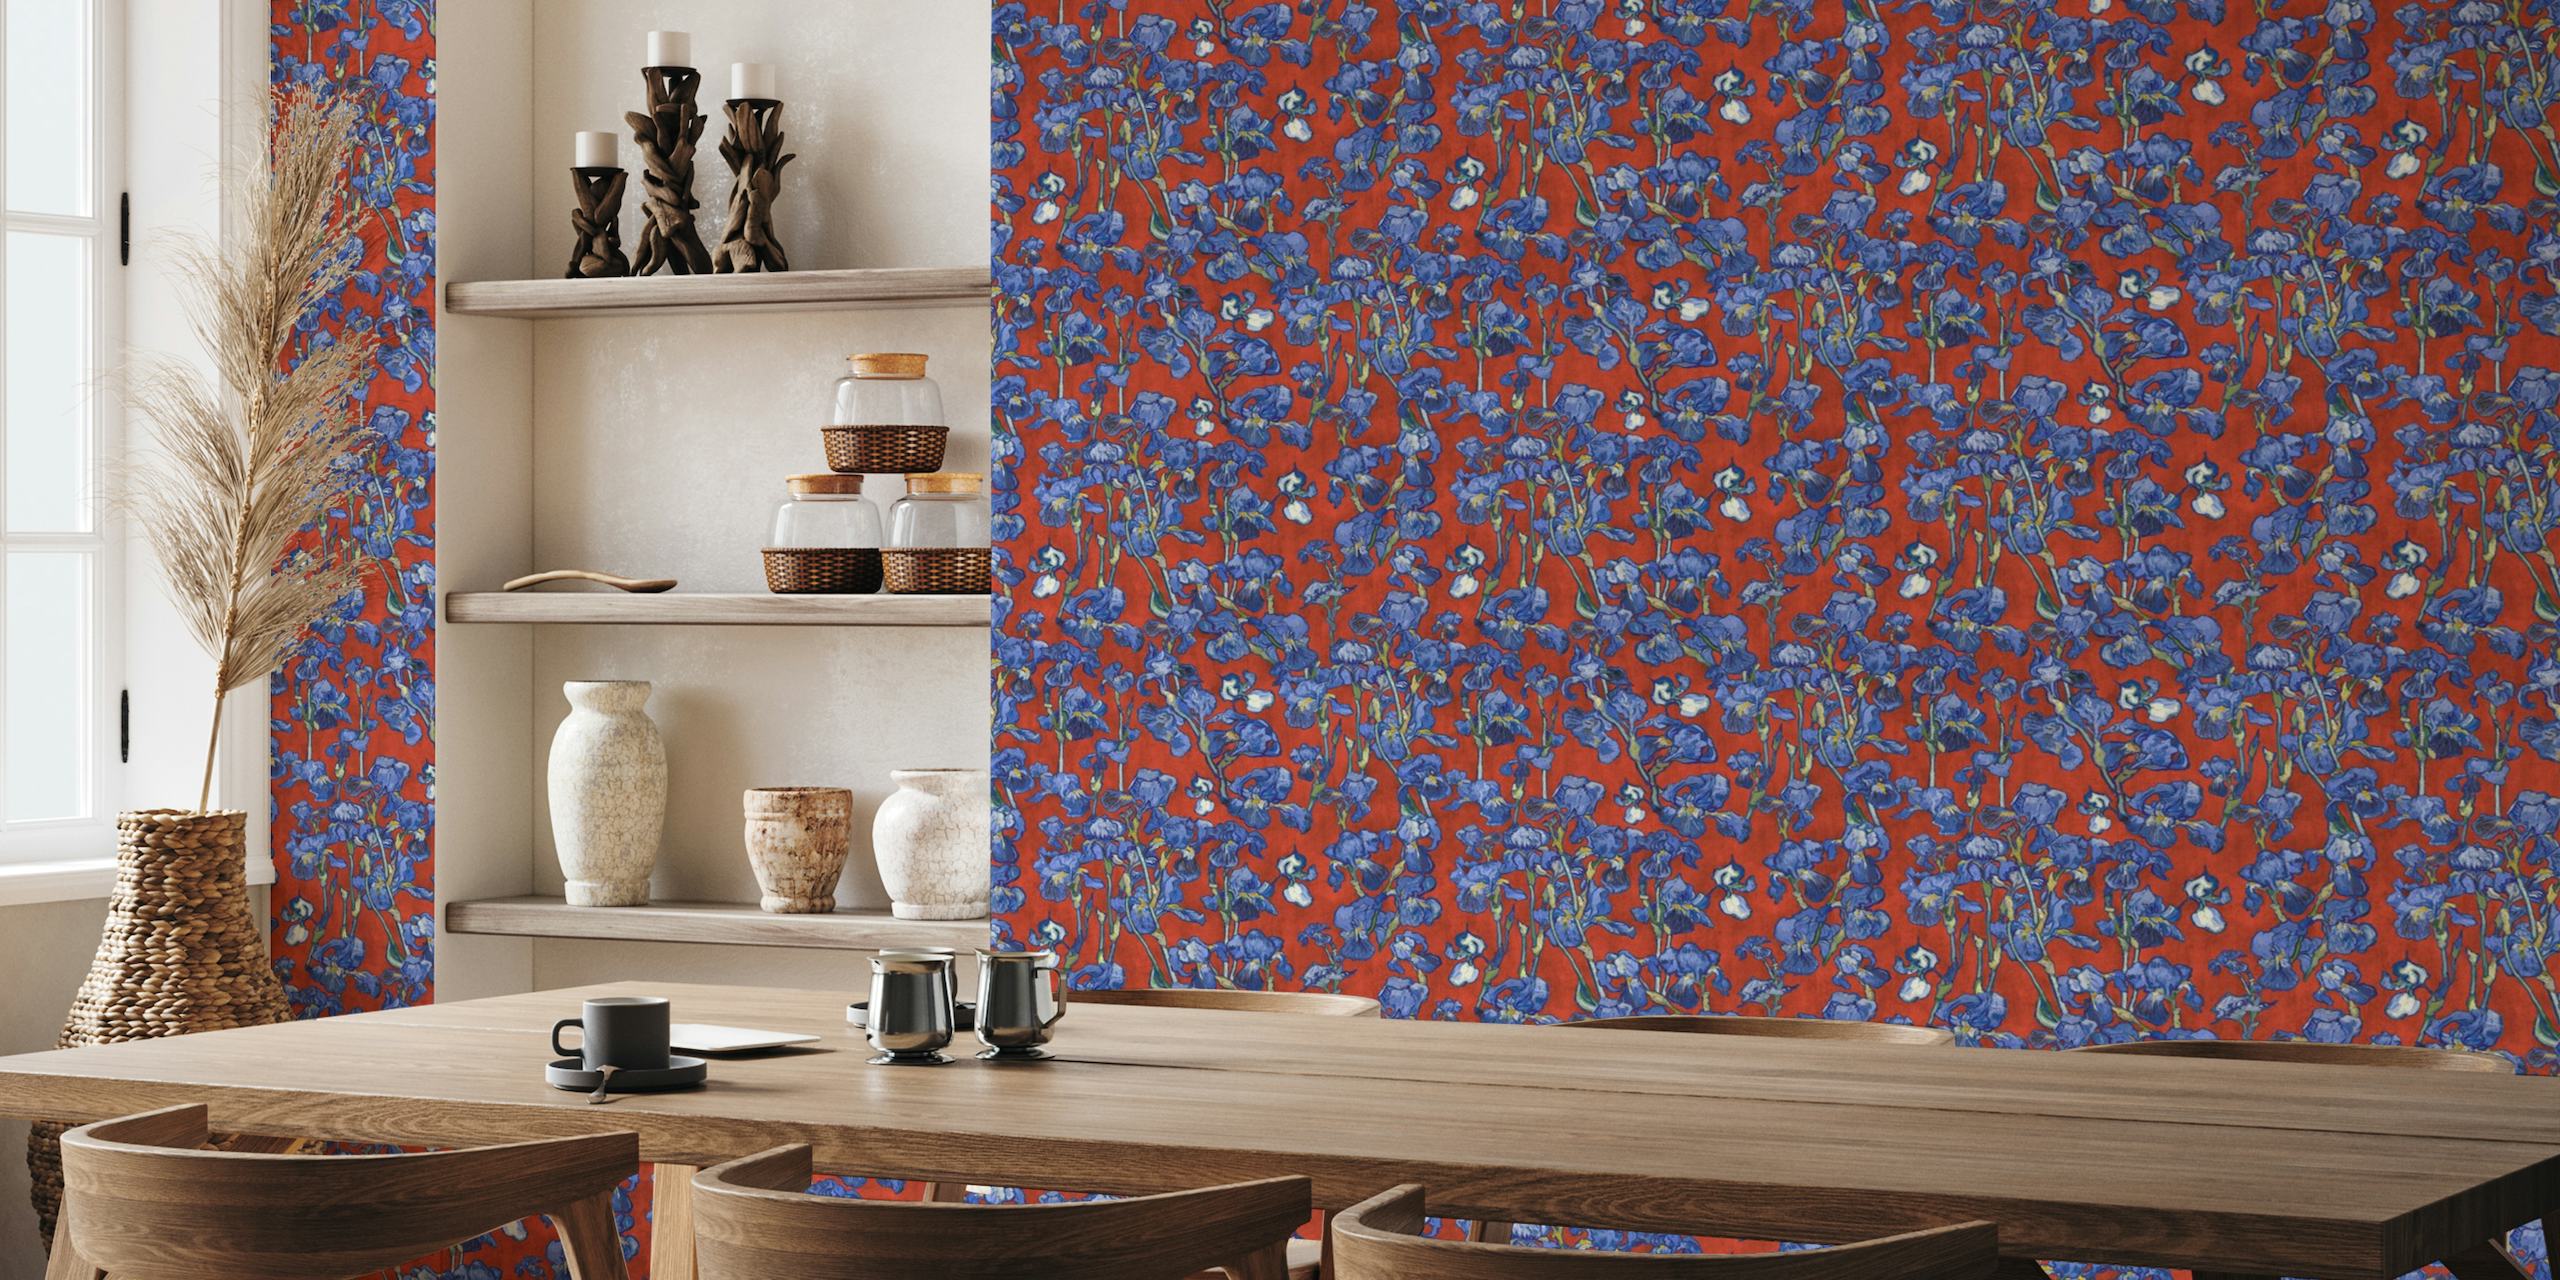 Van Gogh Irises wall mural featuring vermilion red background with cobalt blue iris flowers pattern